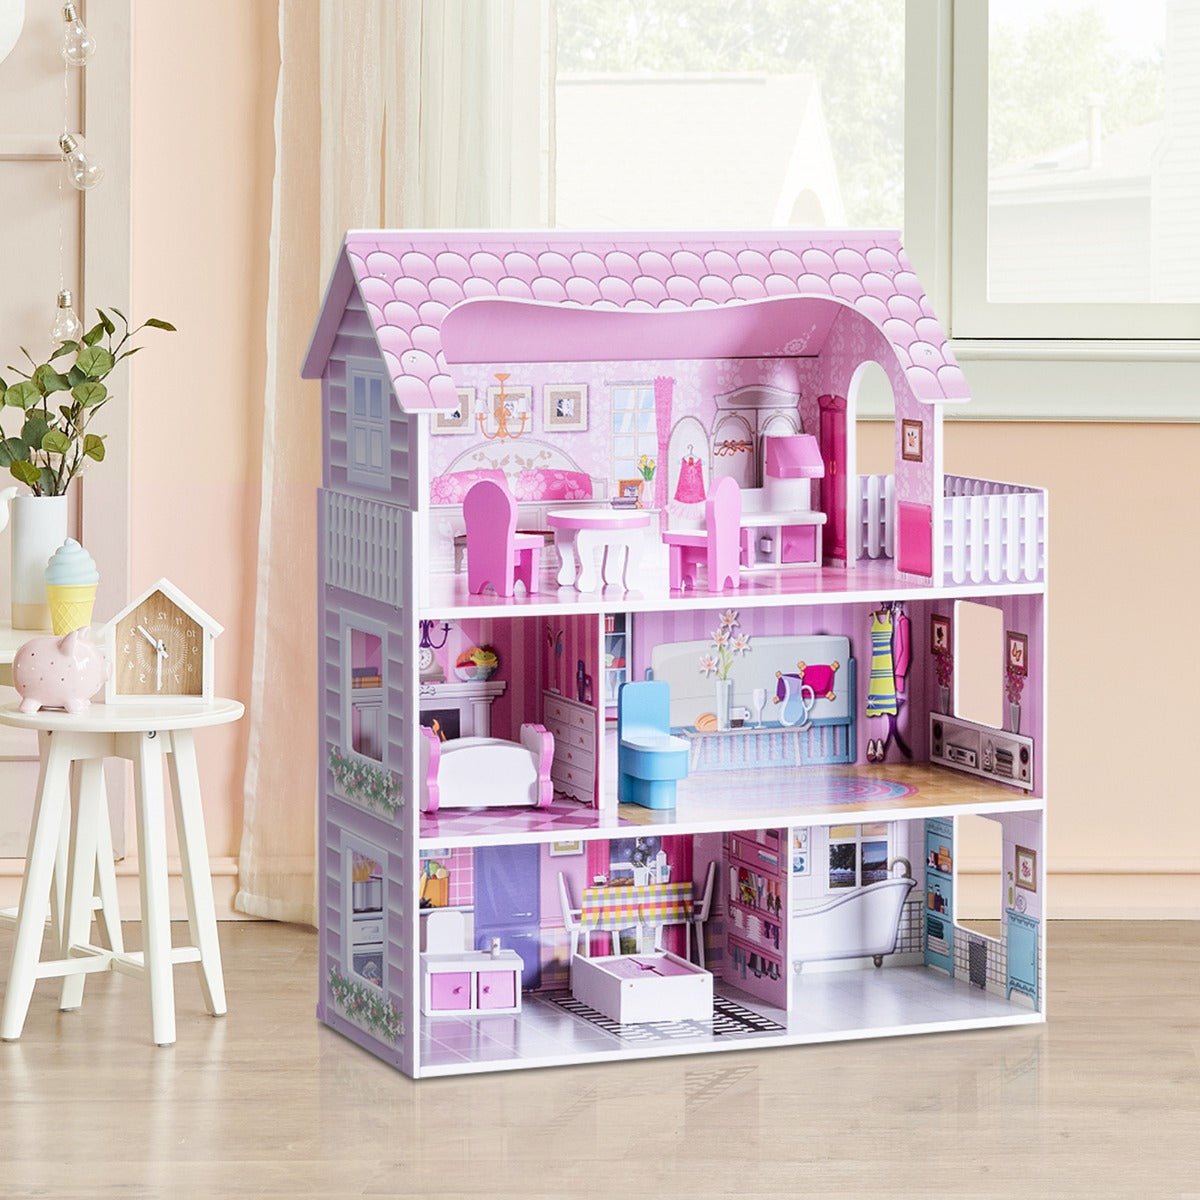 Quality and Imagination: Large Wooden Dollhouse Set